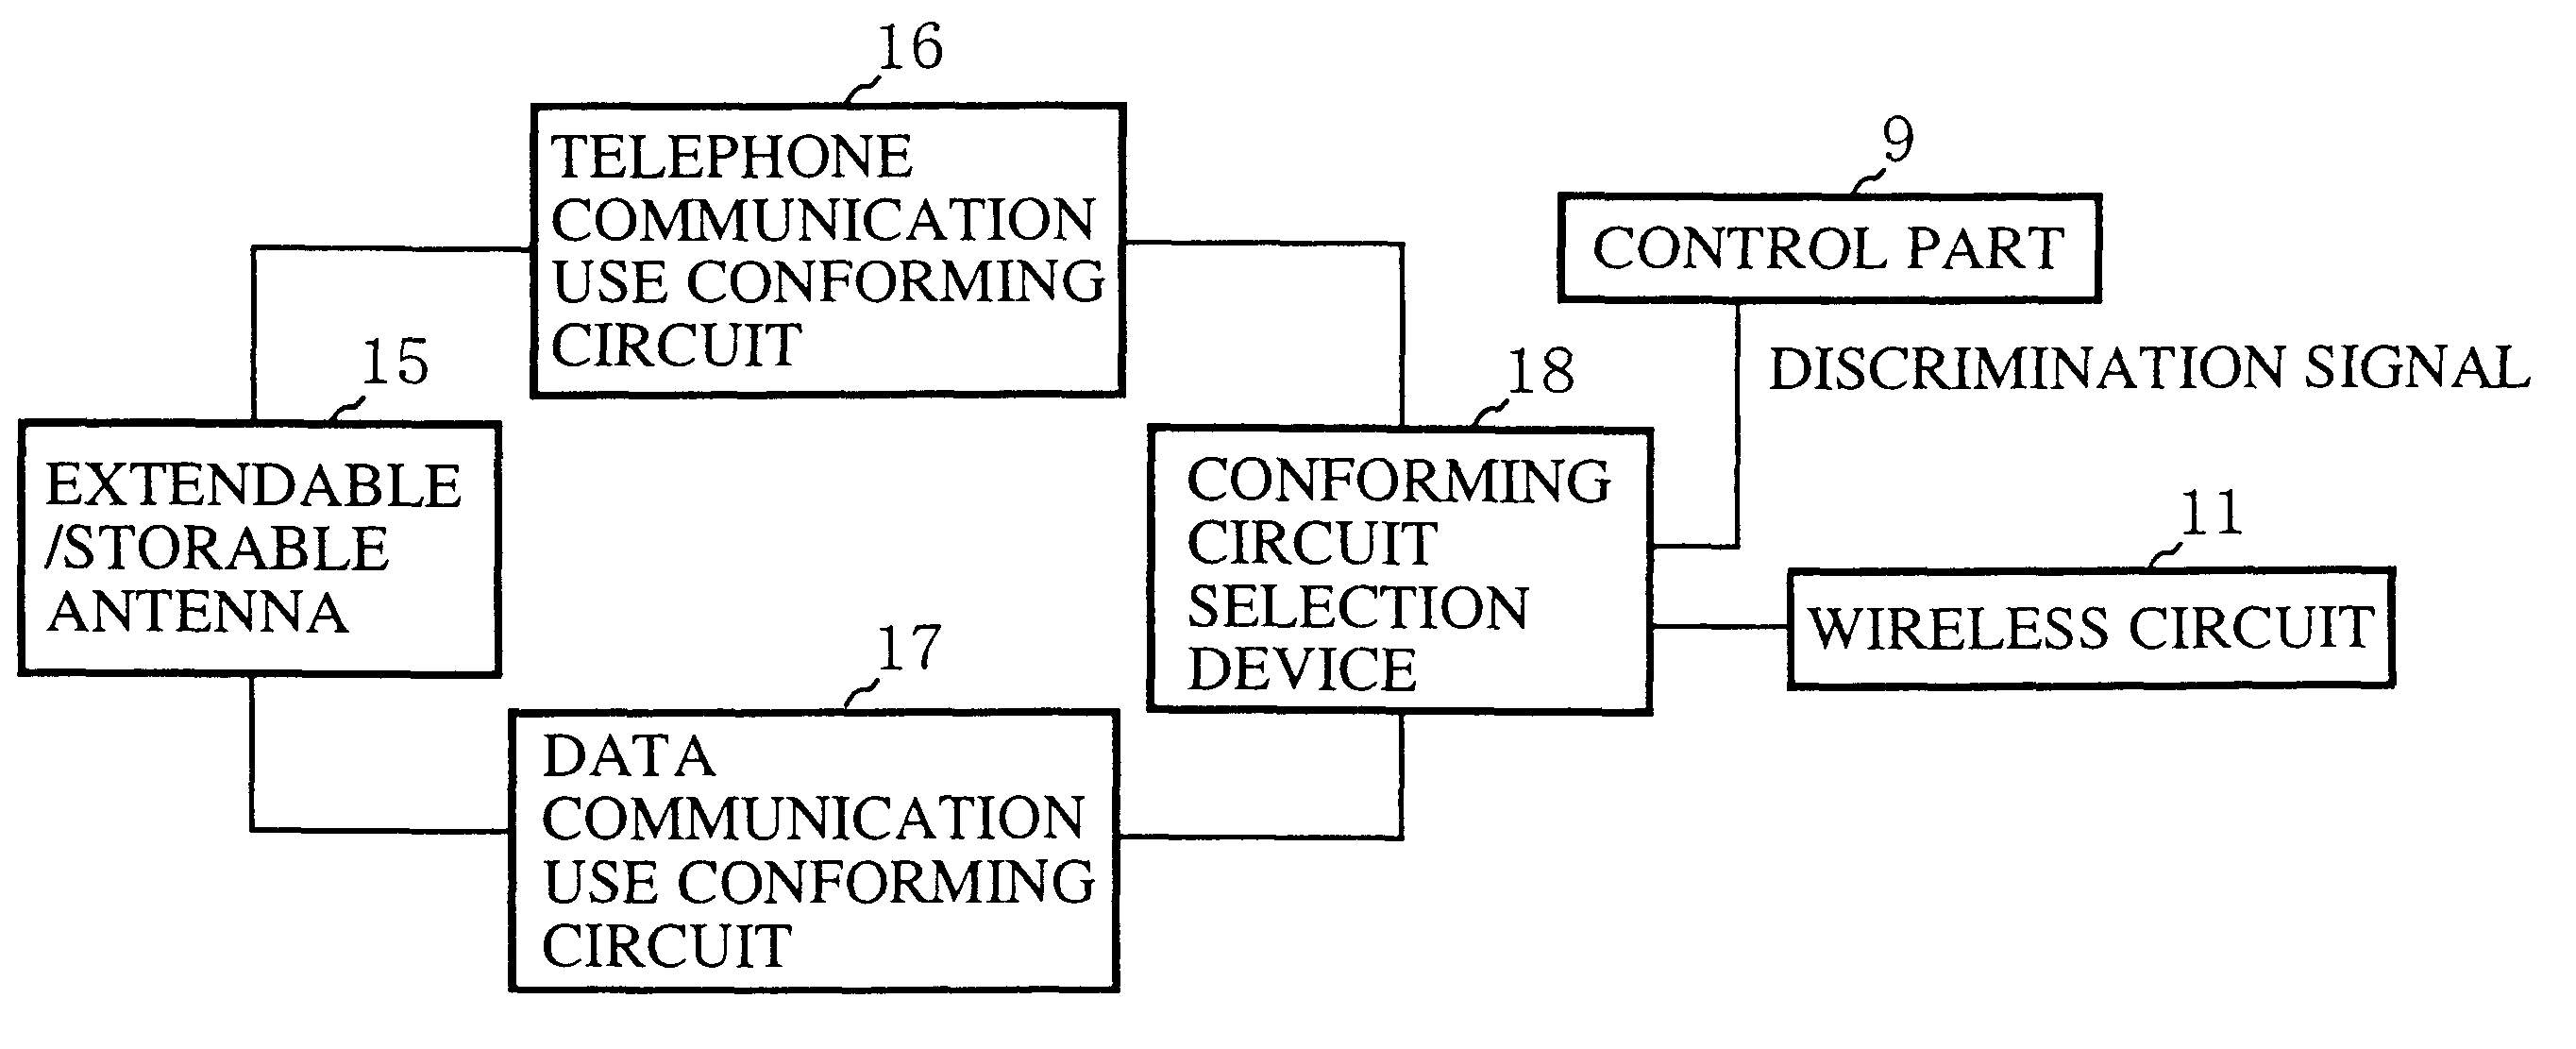 PDA antenna device for switching between antennae of a PDA unit based on detected use condition